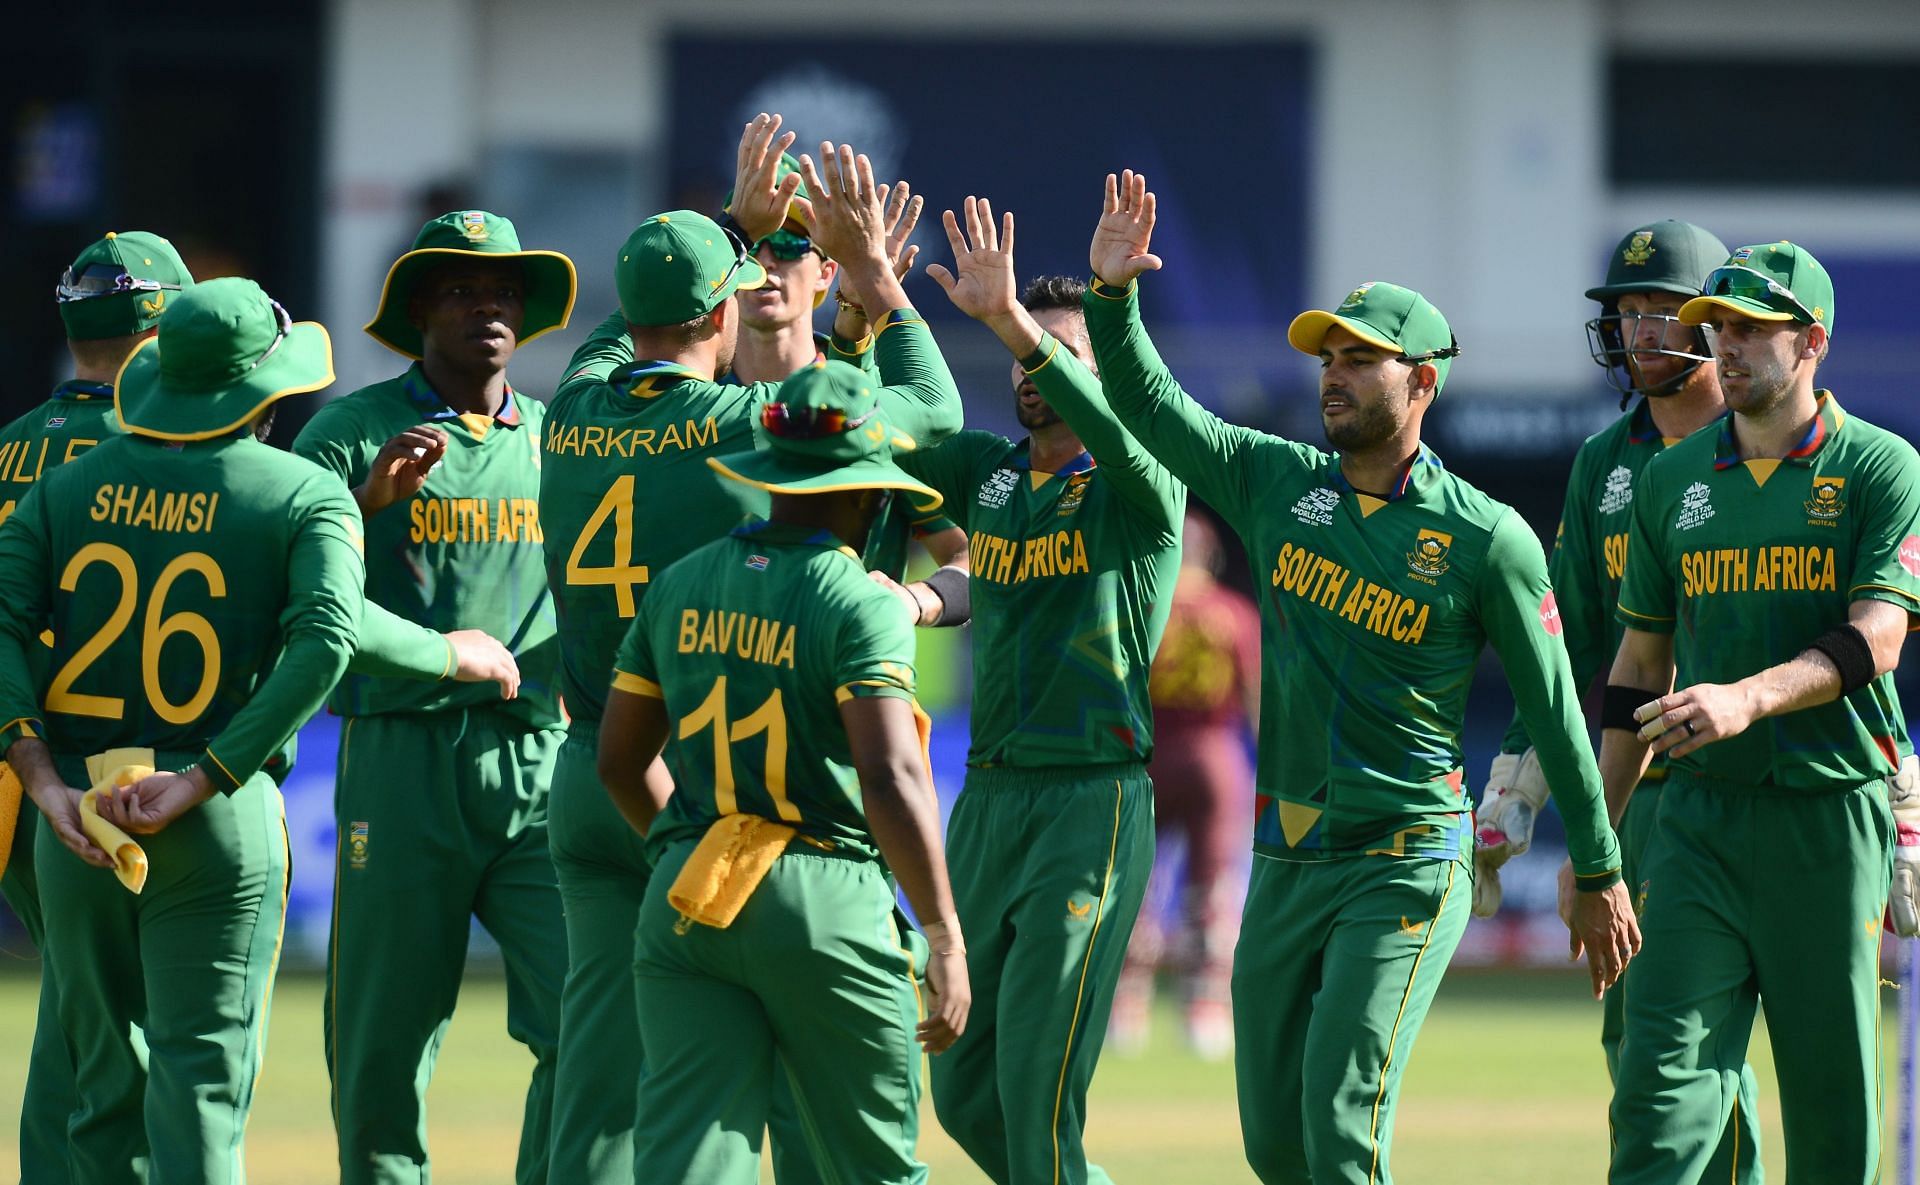 South African cricket team. (Image source: Getty)